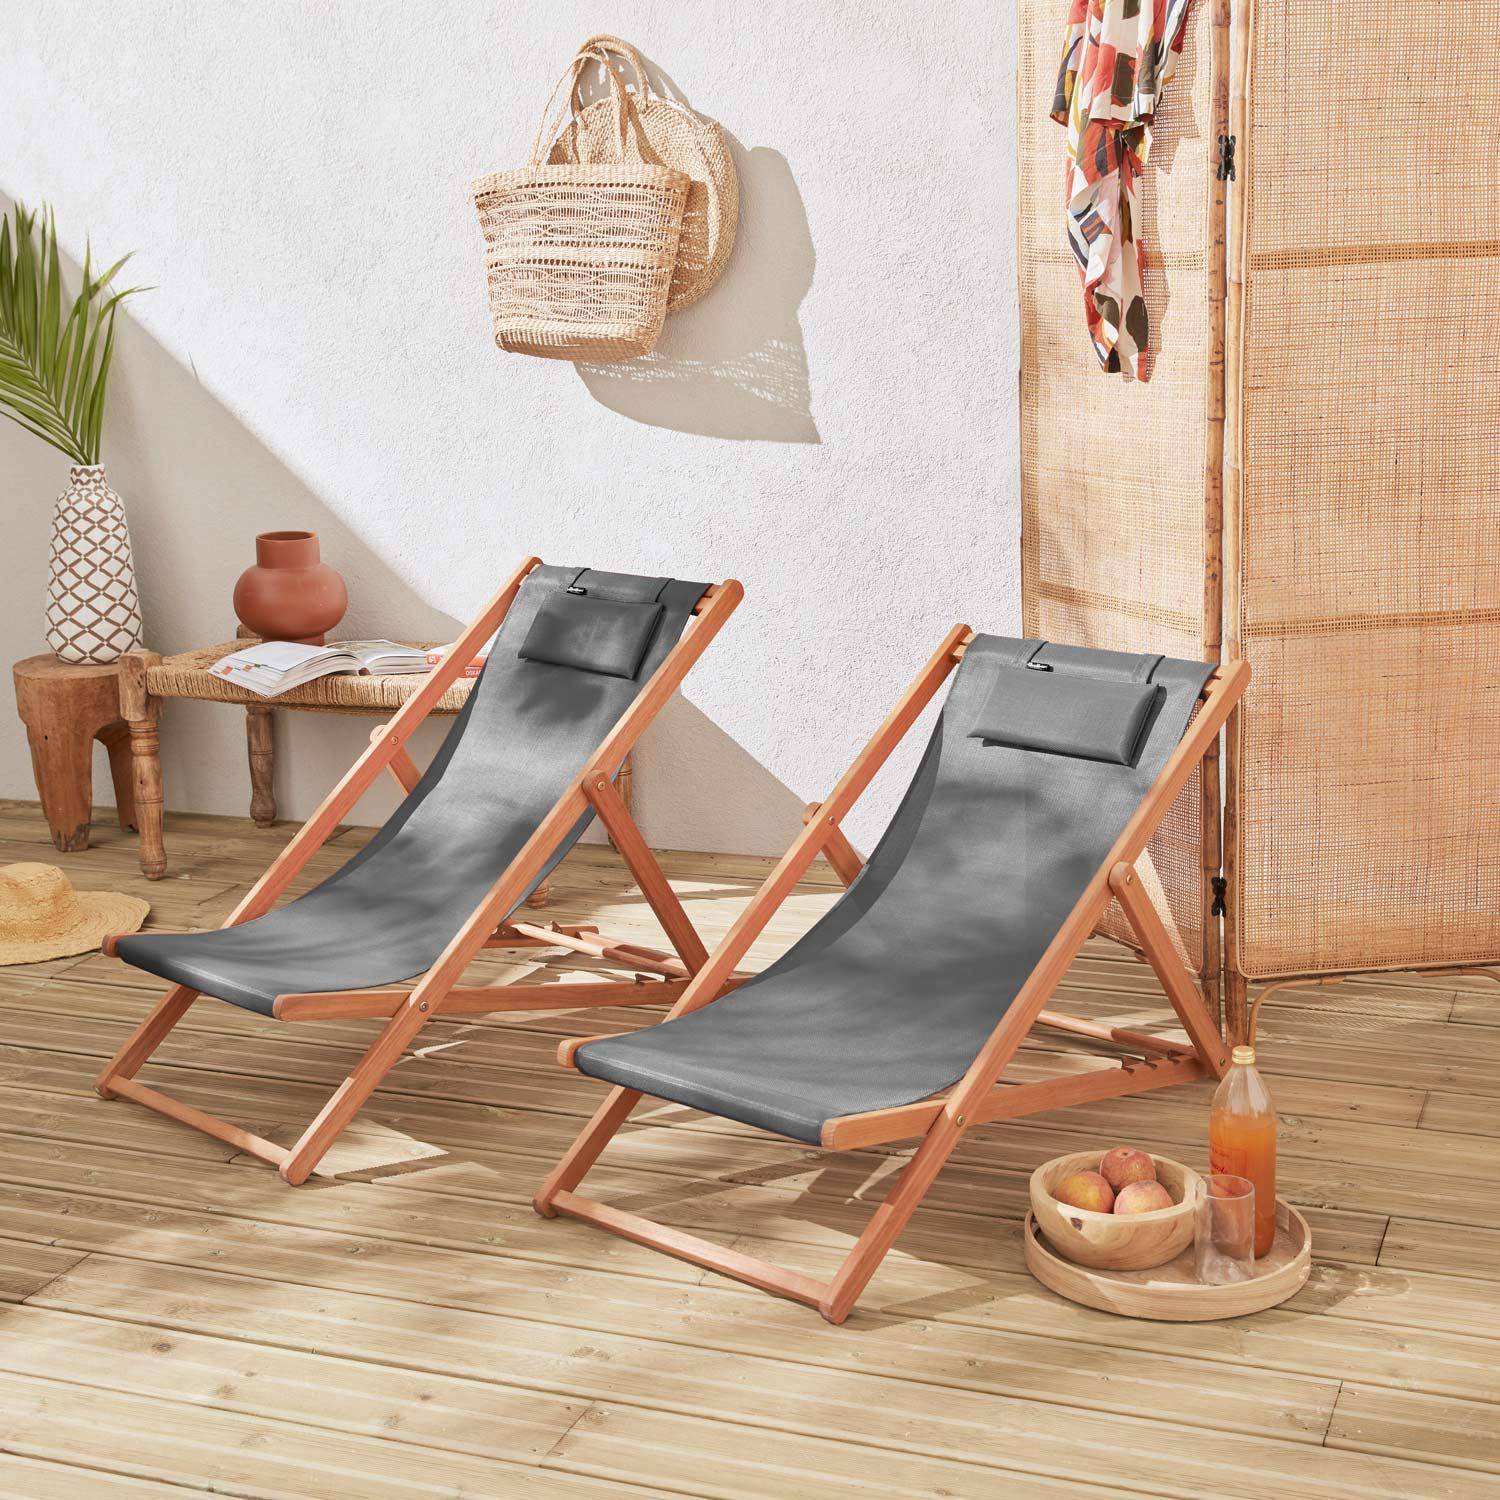 Pair of pre-oiled FSC eucalyptus deck chairs with headrest cushions - Creus - Wood/Anthracite Photo1